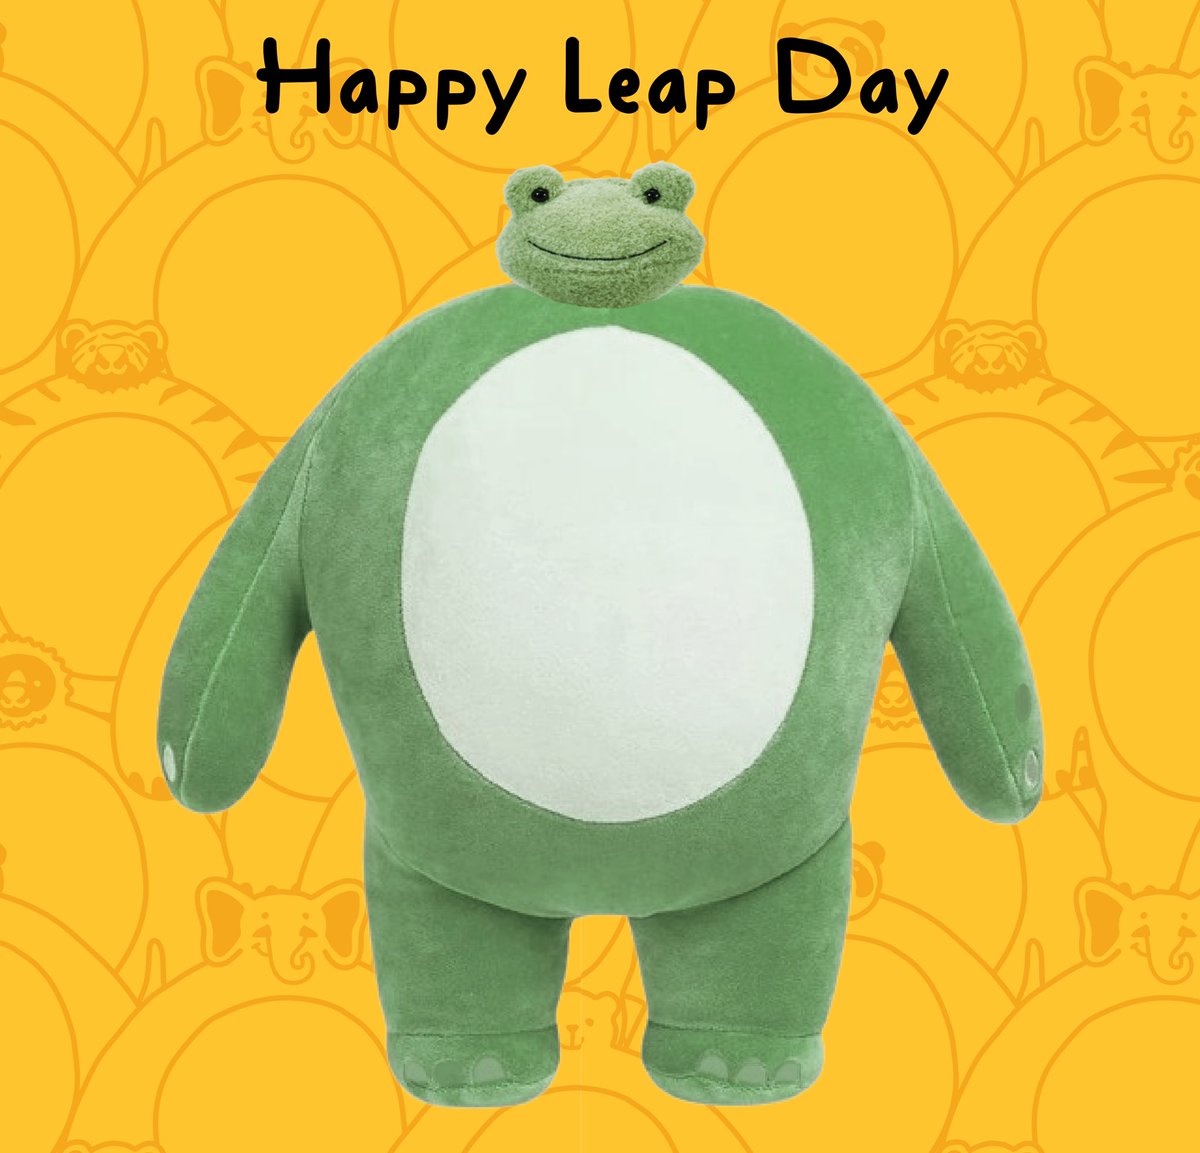 IT’S LEAP DAY! Happy Birthday to all the people who only get to celebrate once every four years. On another note, no, this tiny headed frog is not real, but come on… It’s a leap day (we had to). 🐸